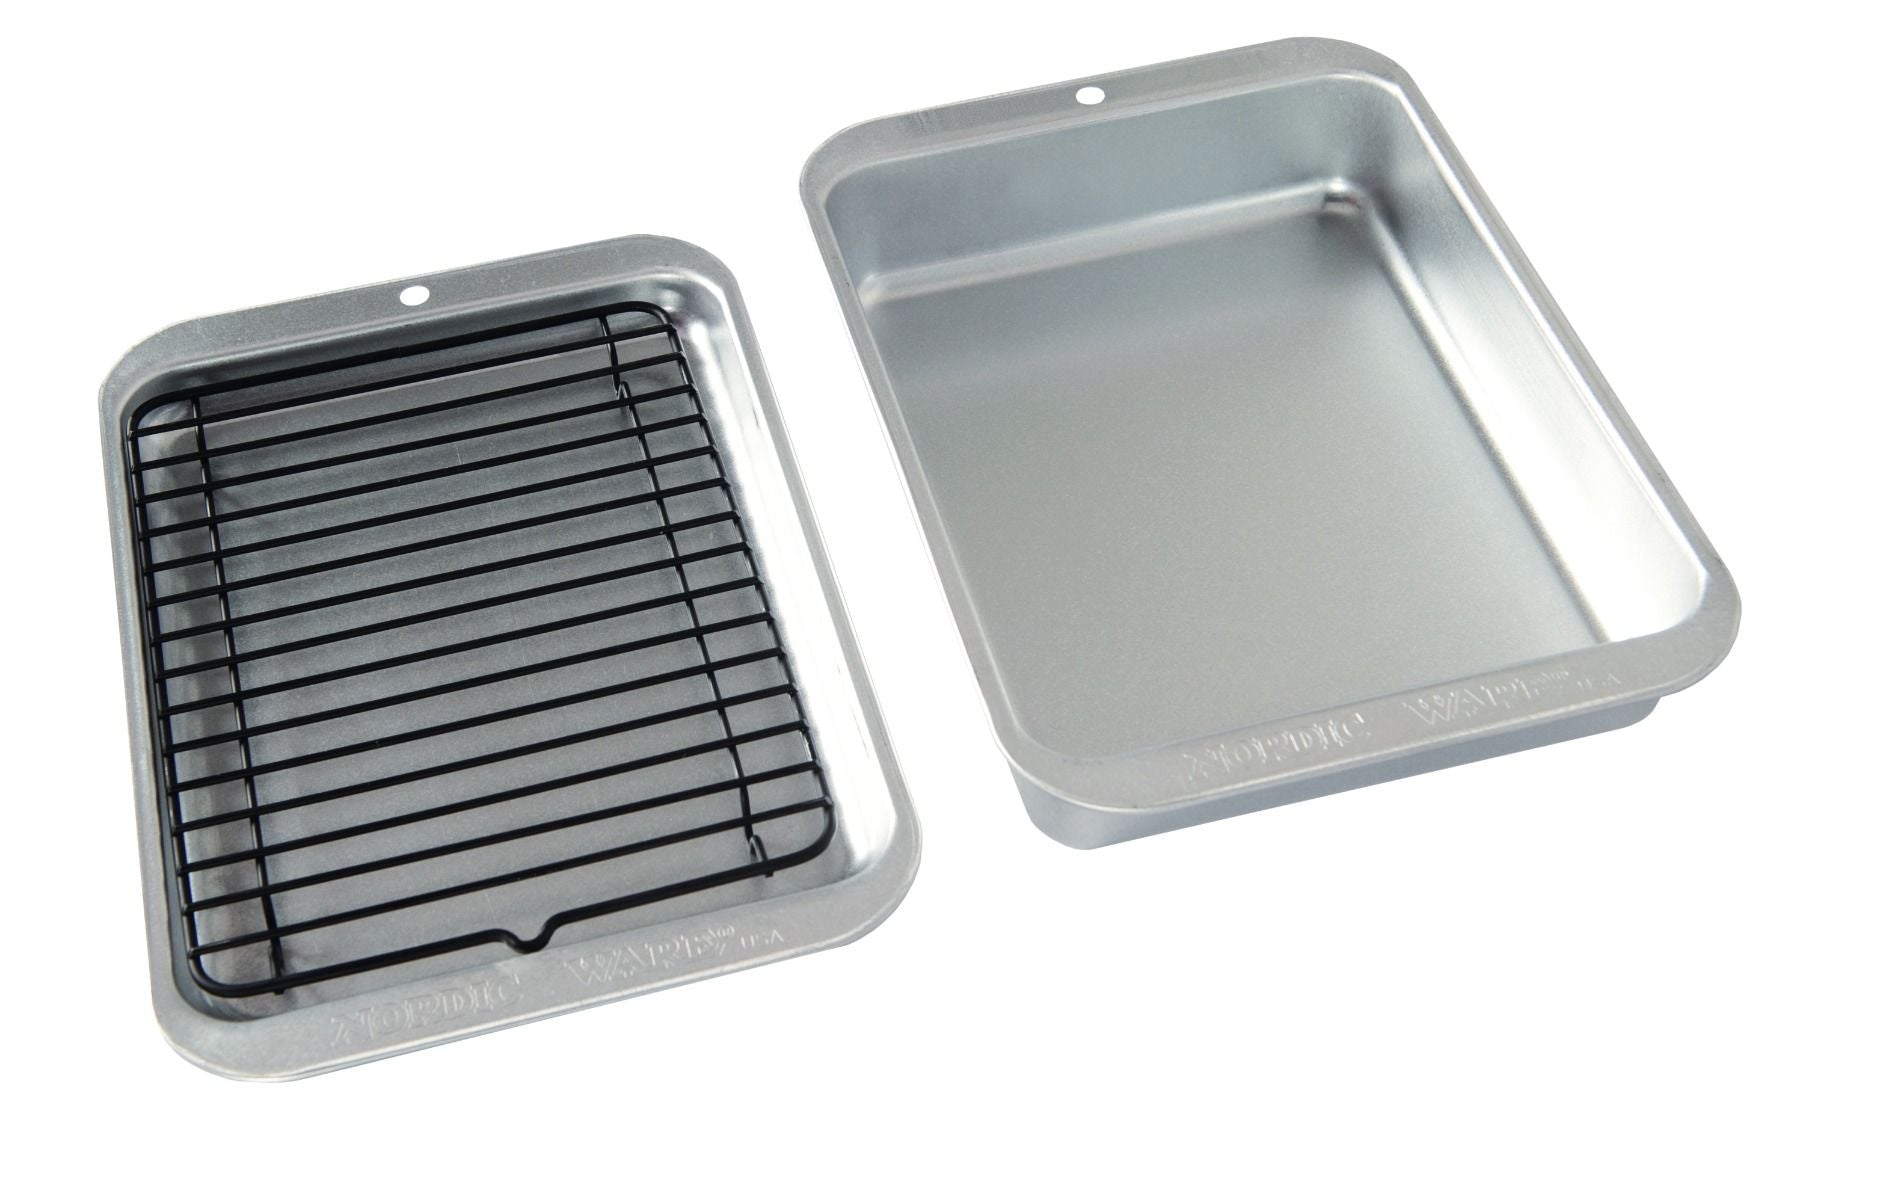 Nordicware Toaster Oven 3-piece Broil & Bake Set